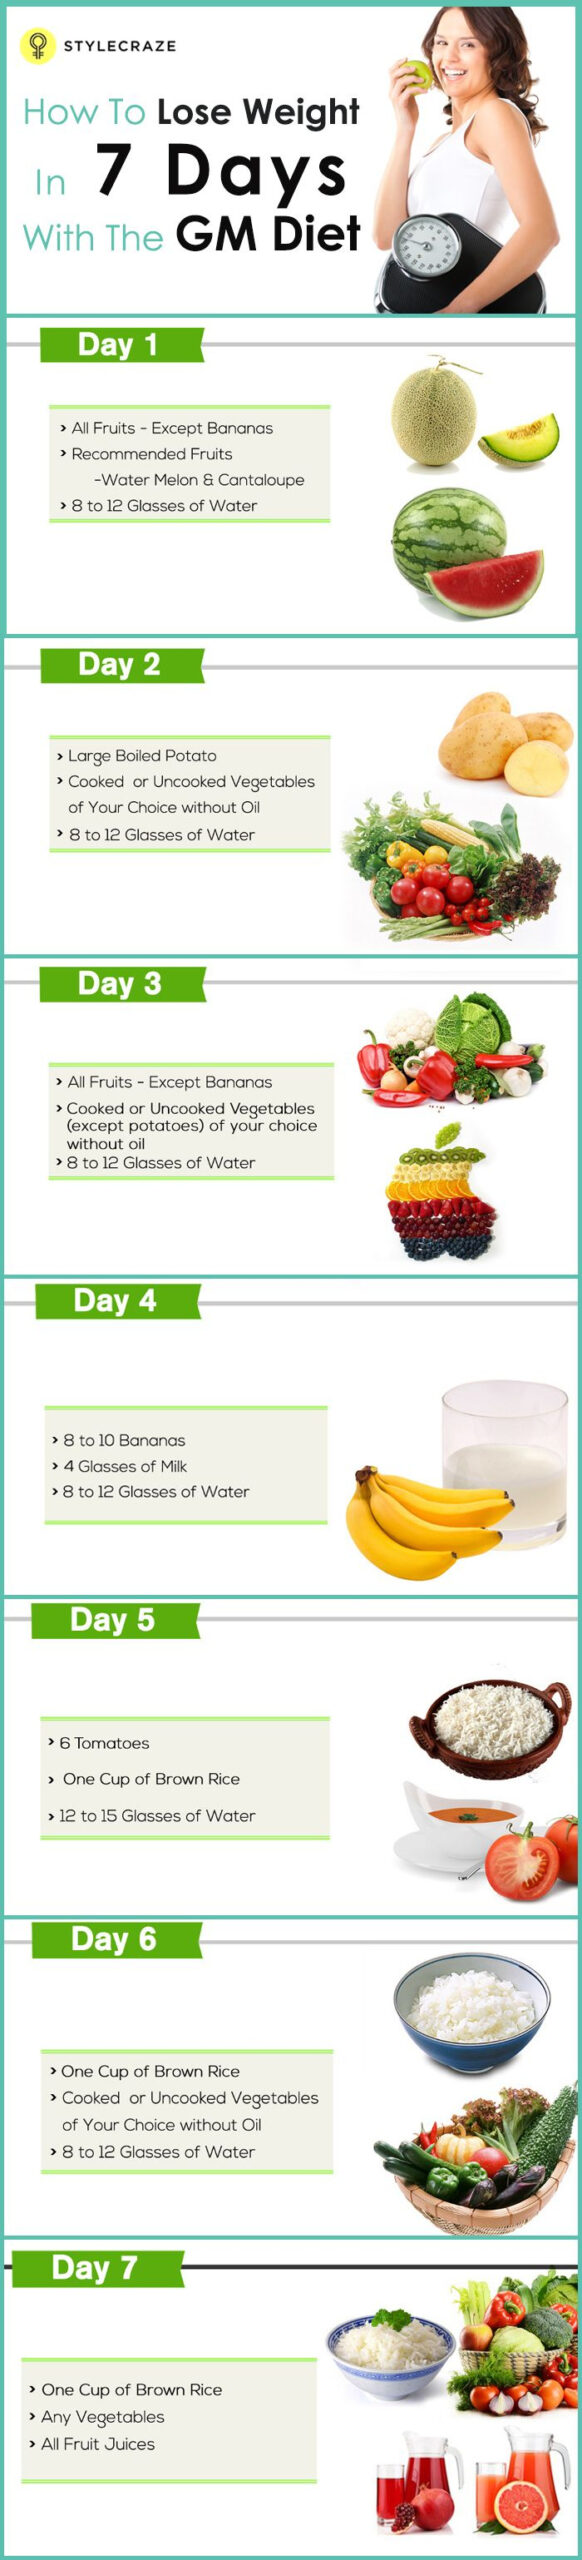 7 Day Diet Meal Plan To Lose Weight 1 Calories 